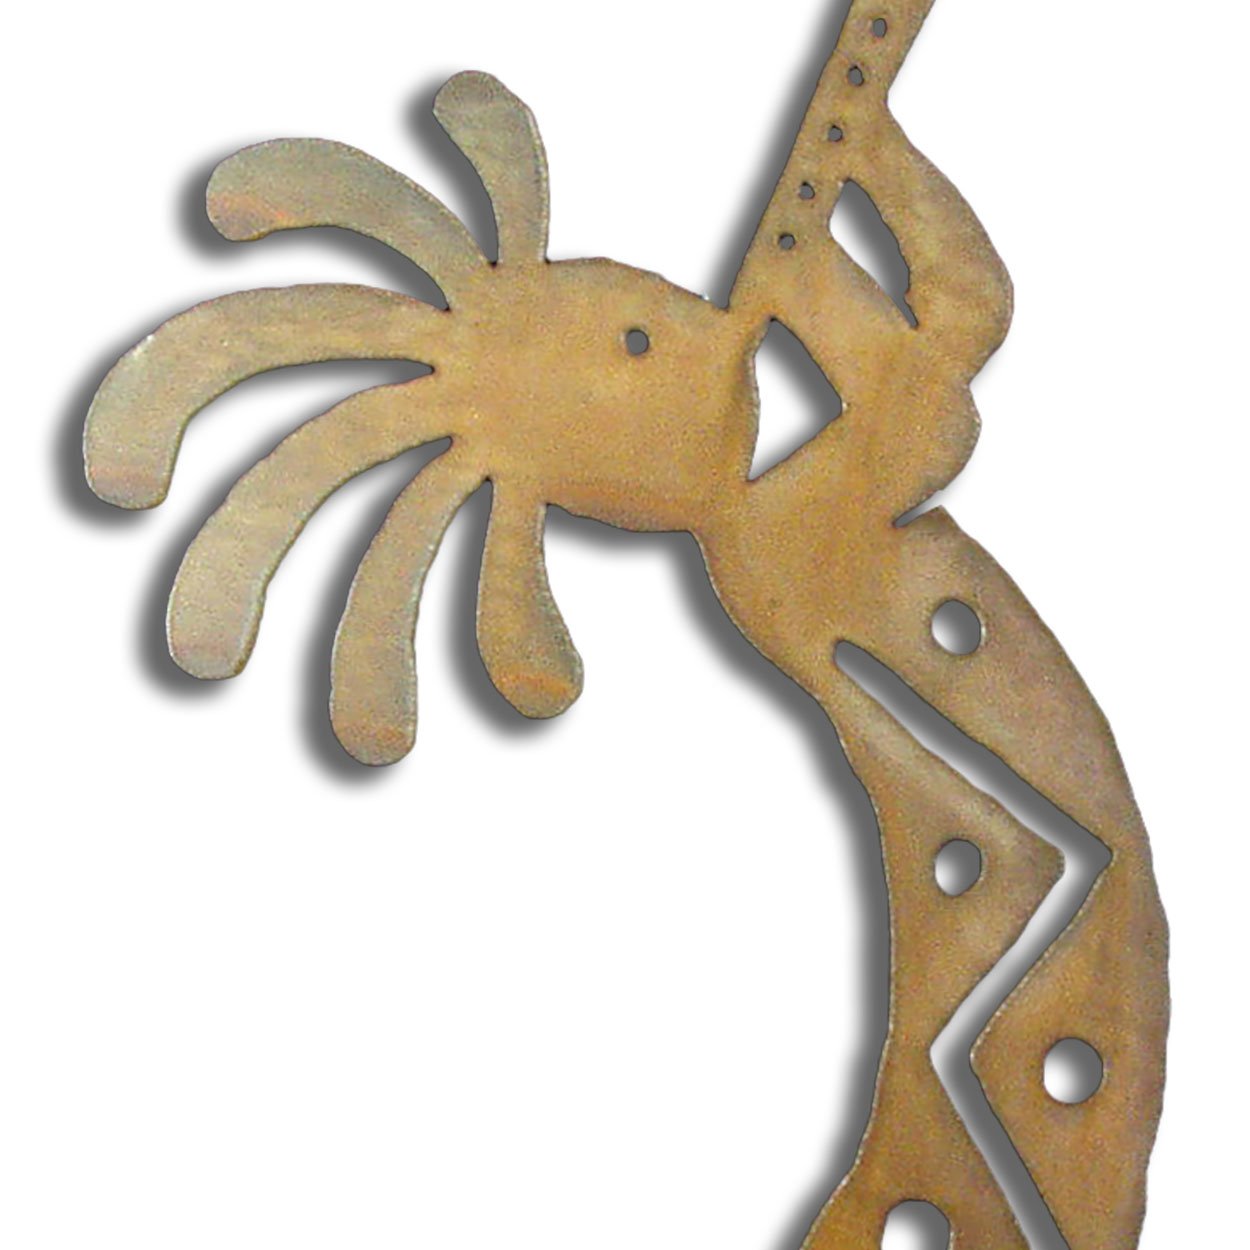 165201 - 12-inch small Kokopelli Trumpeter Facing Right 3D Metal Wall Art in a rich rust finish